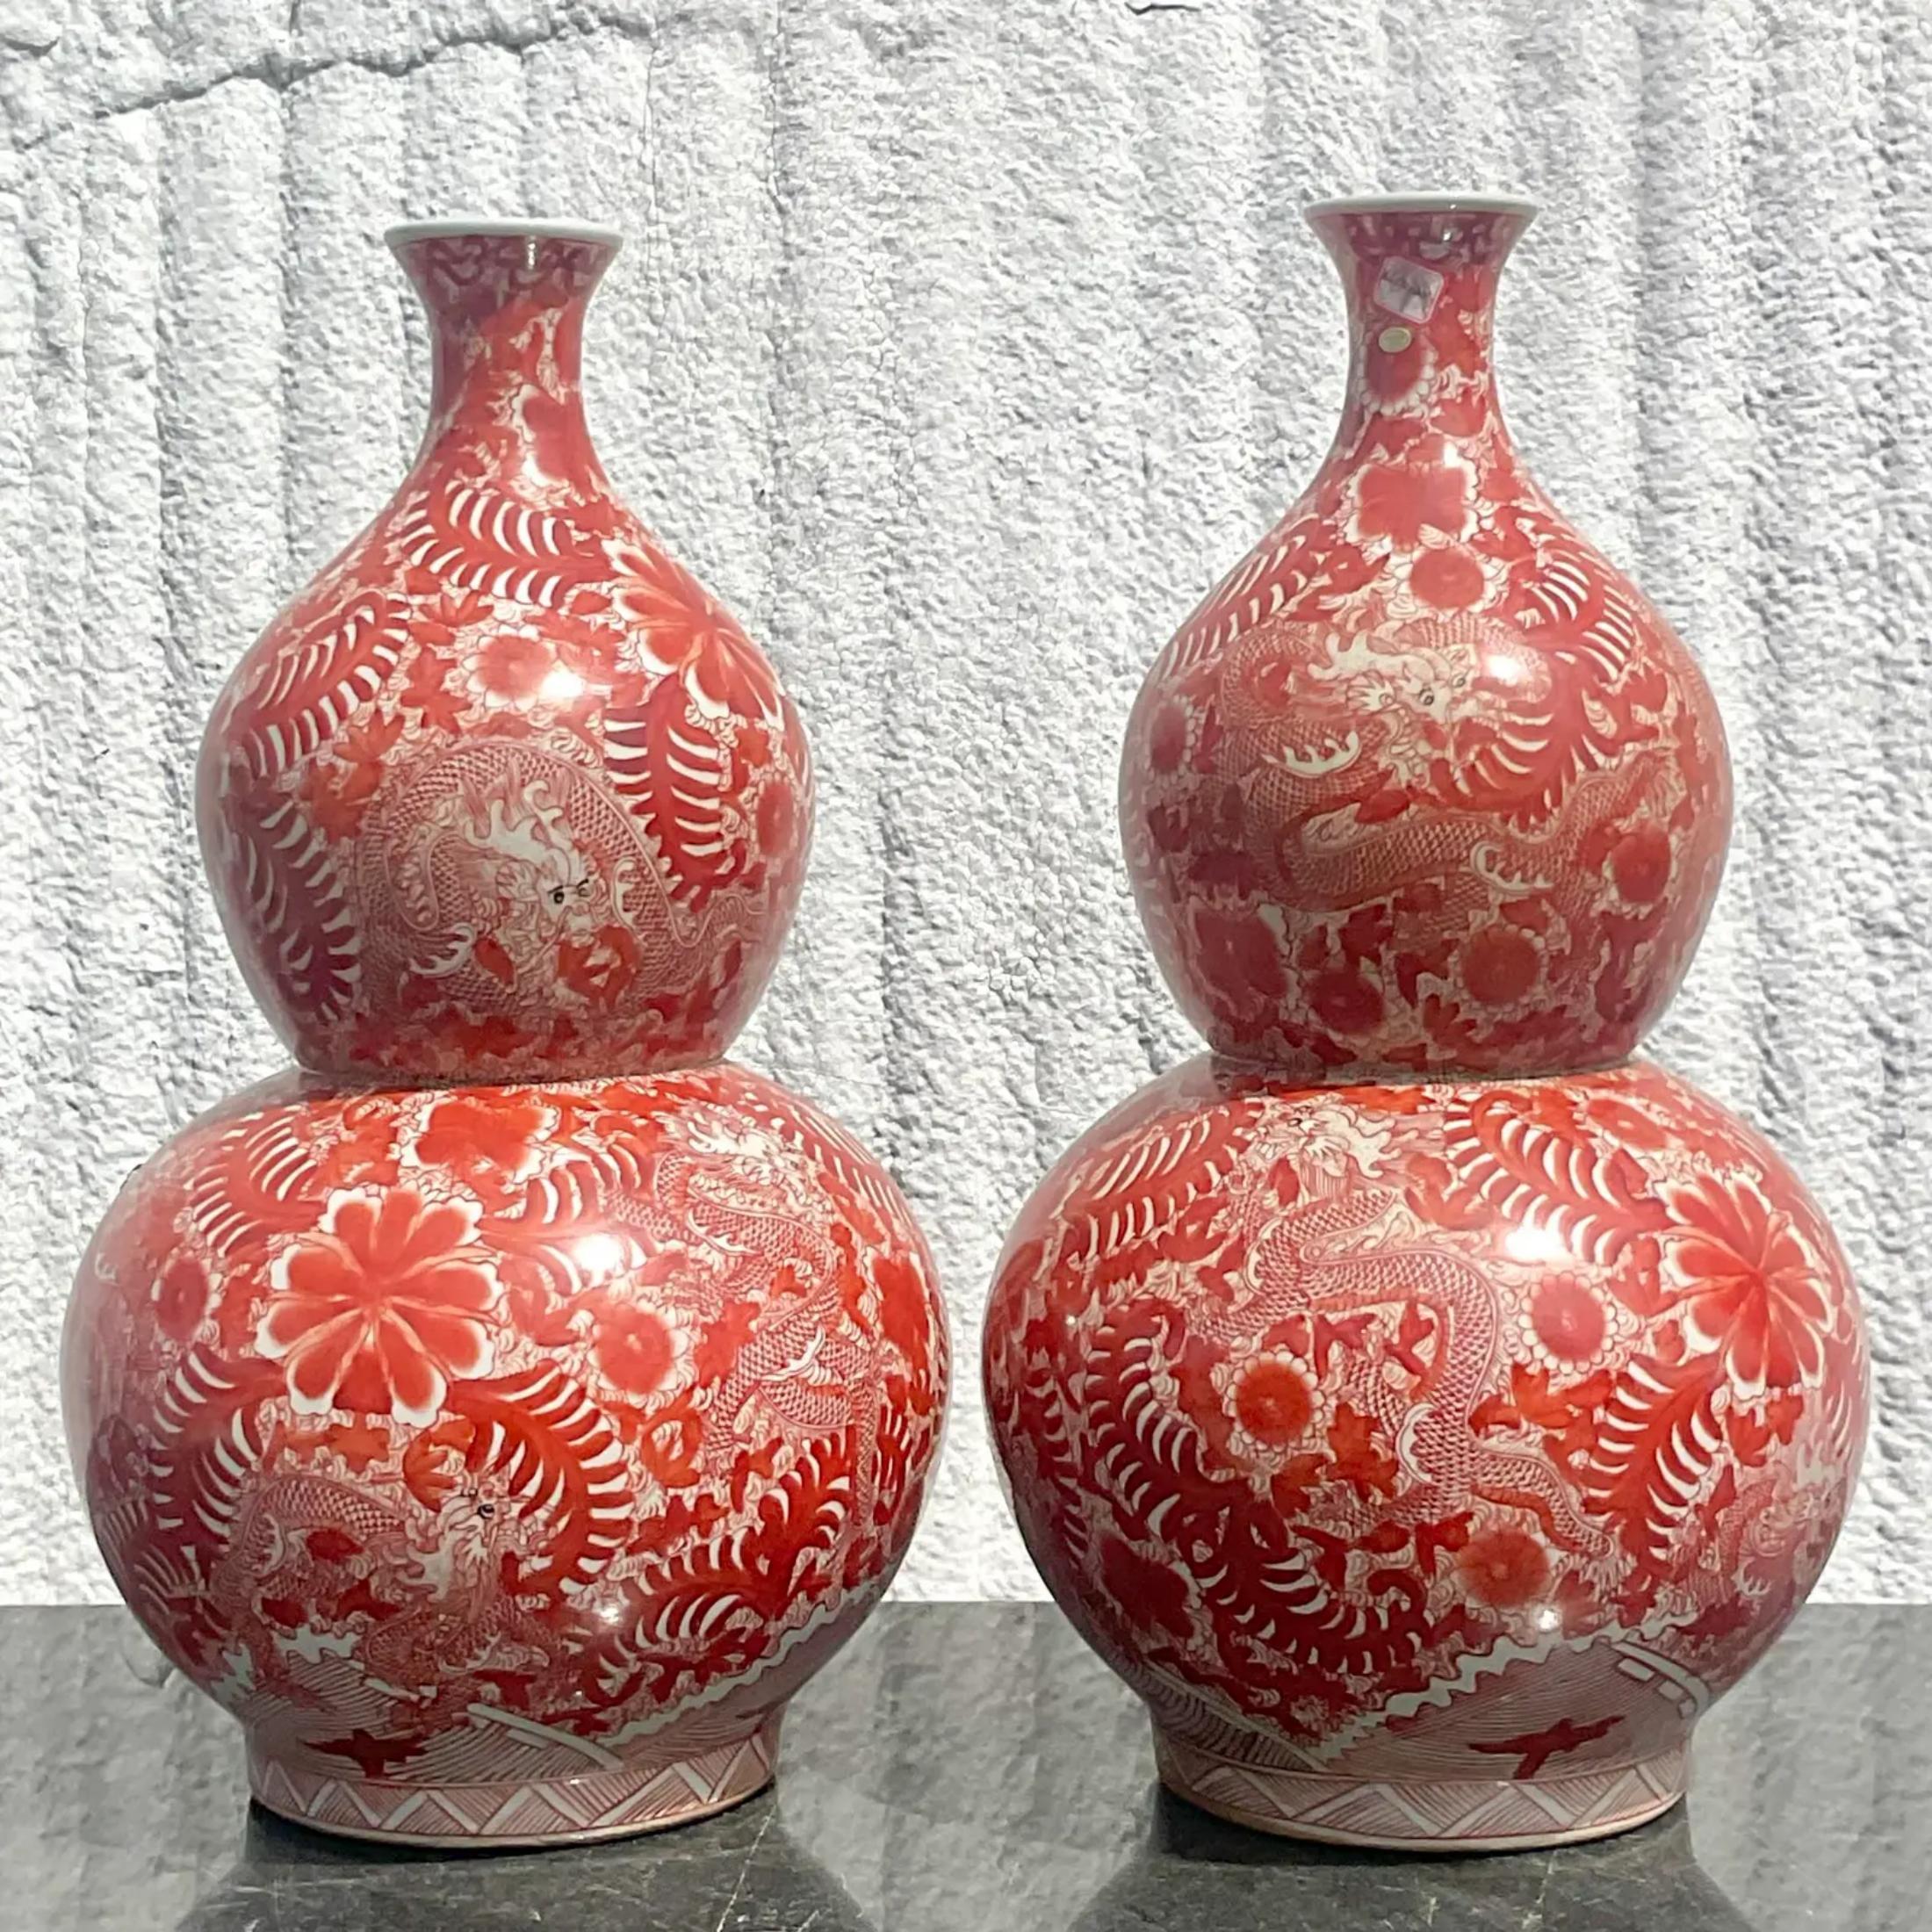 Chinese Chippendale Vintage Asian Glazed Ceramic Double Gourd Lamps - a Pair For Sale